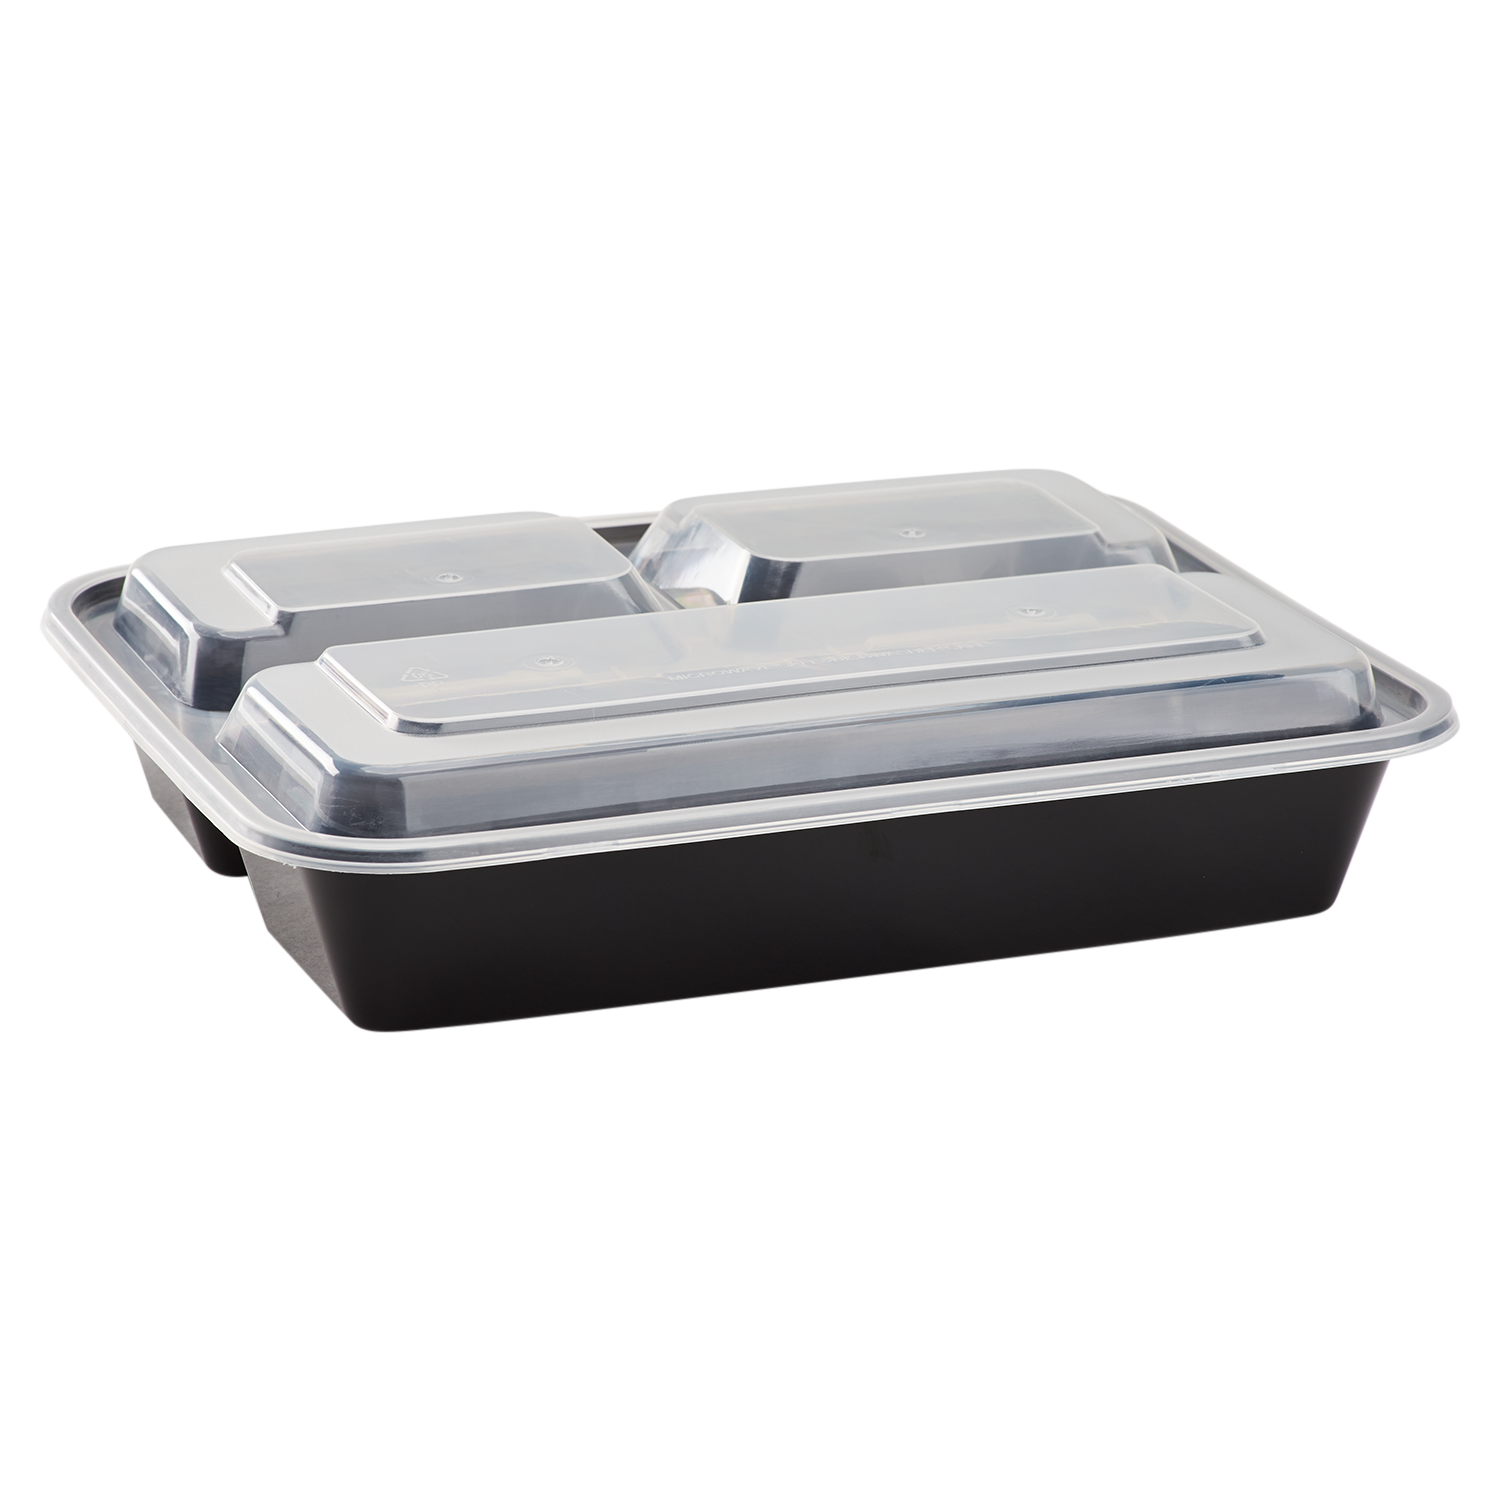 LIYH 48 Pack Meal Prep Containers 32oz,3 Compartment Bento Box Microwave  Food Storage Containers Takeout Containers with Lids Containers Stackable